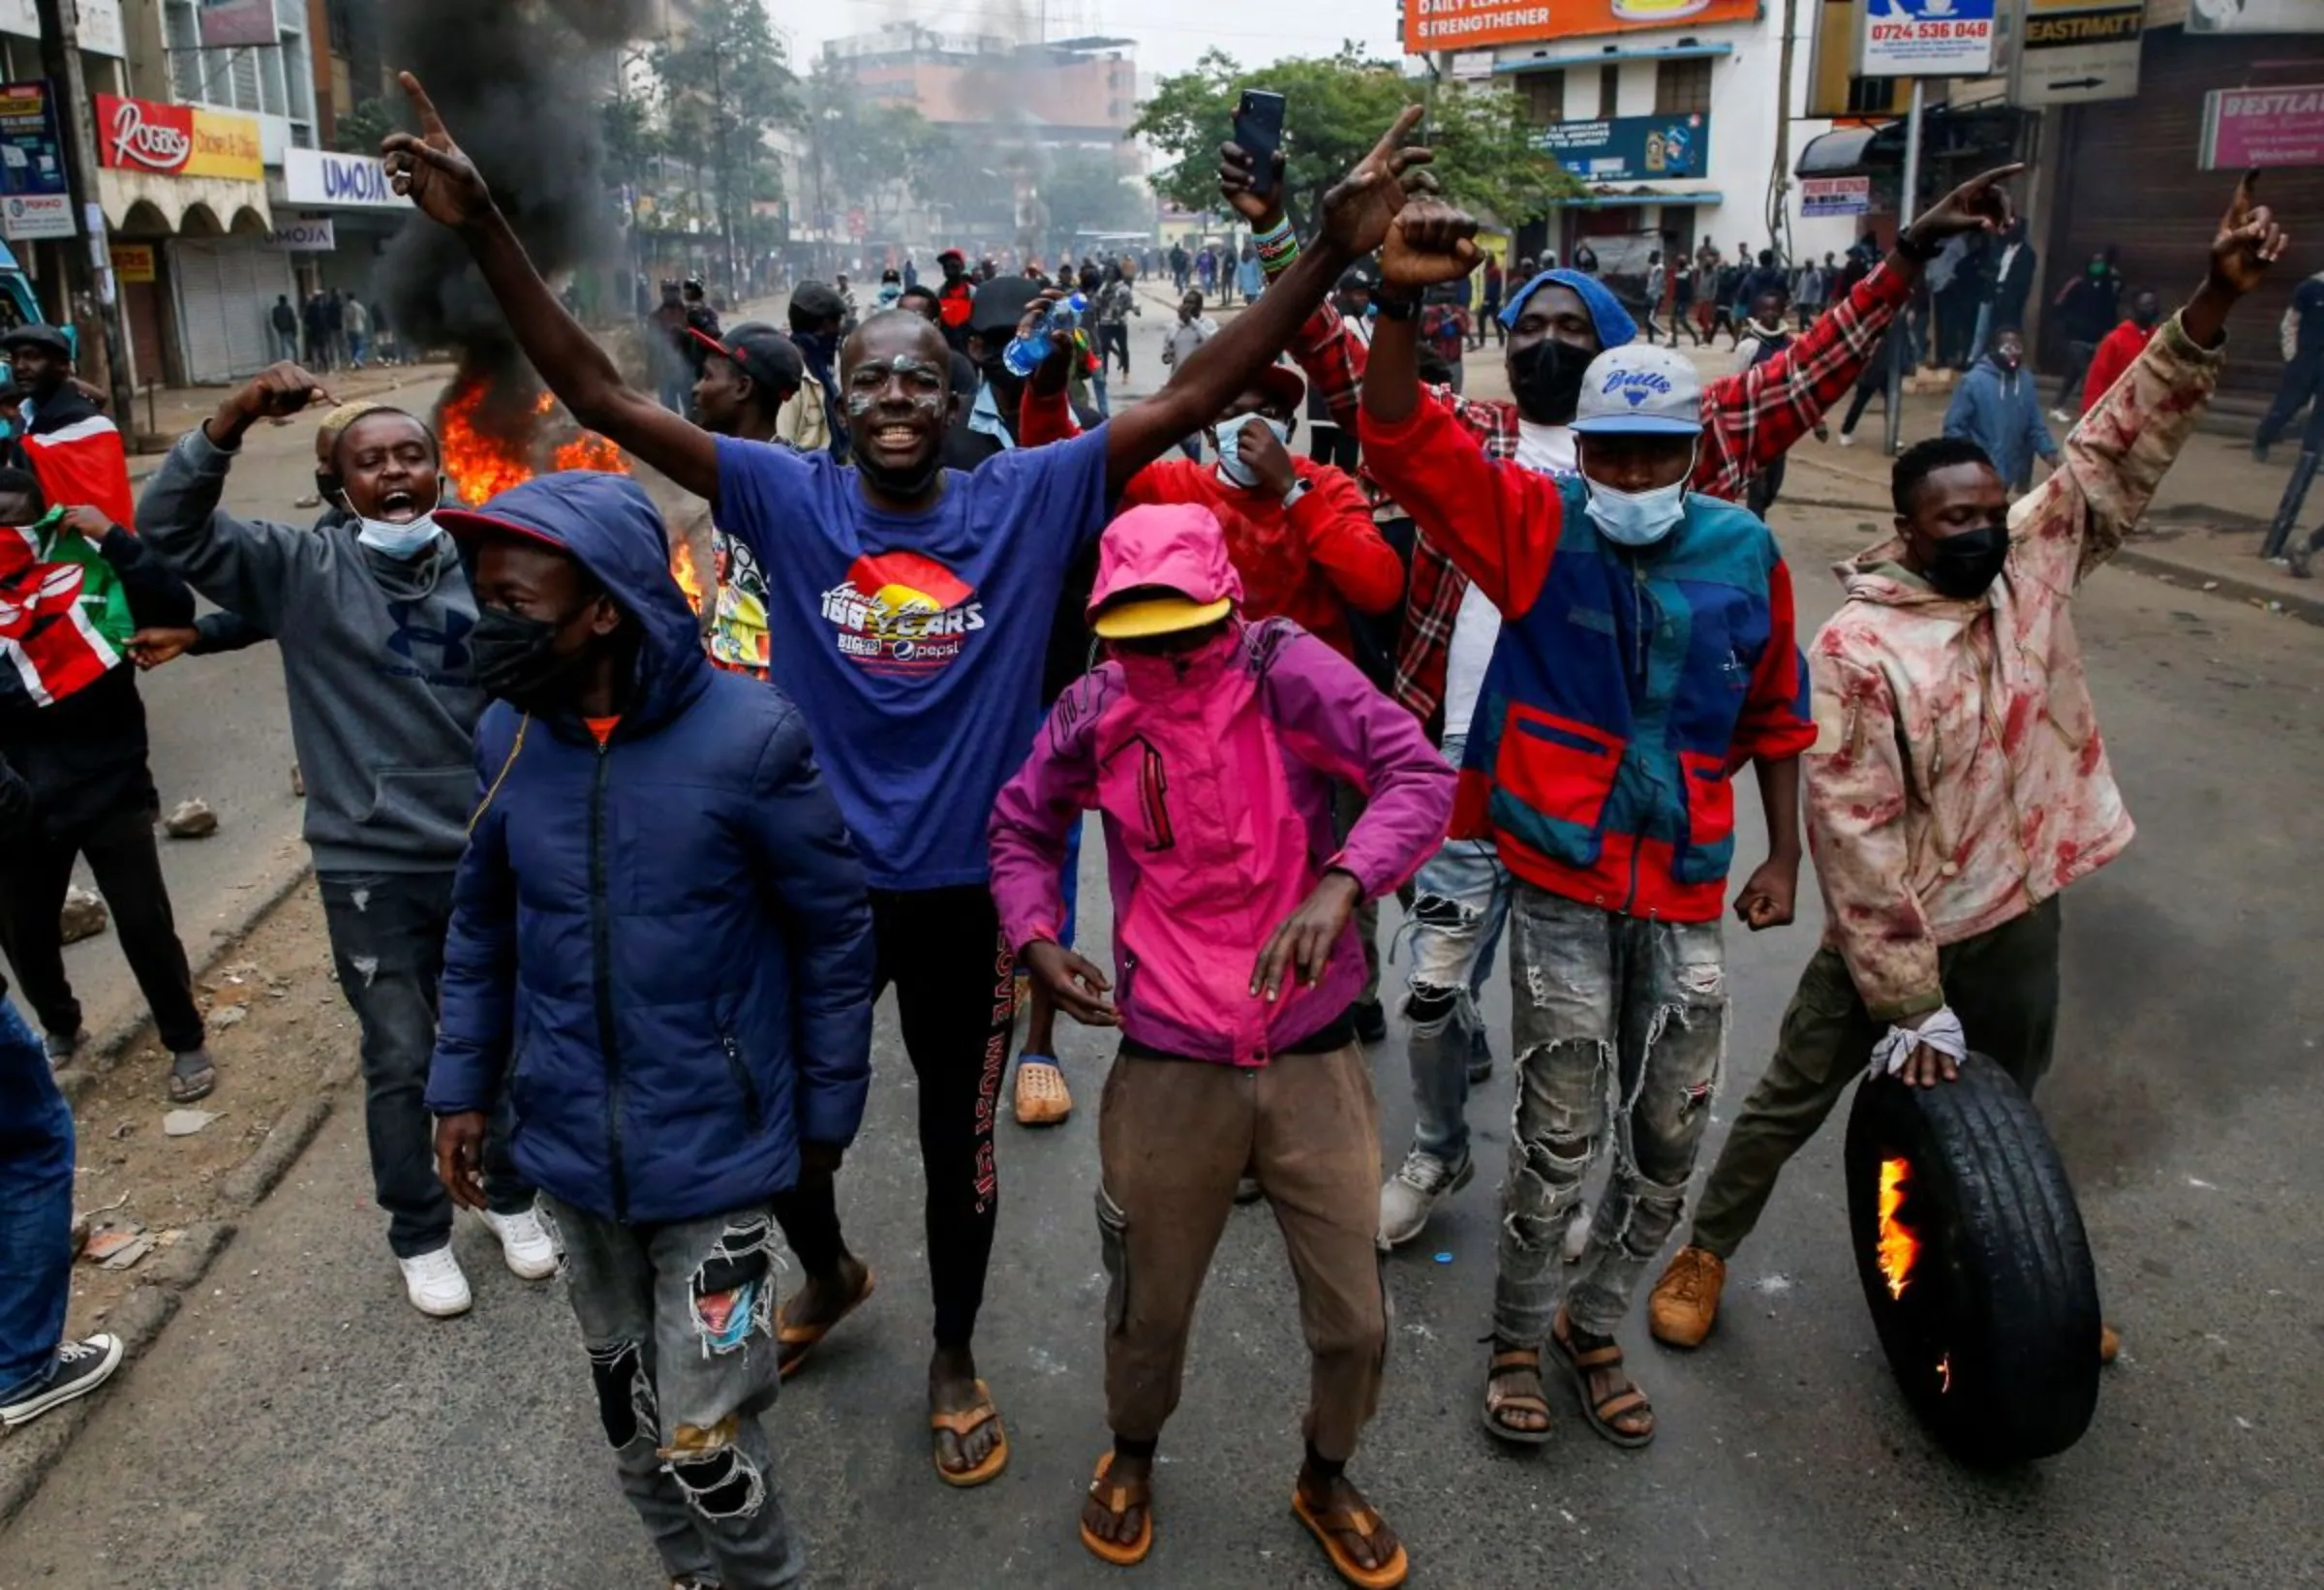 Protesters participate in an anti-government demonstration following nationwide deadly riots over tax hikes and a controversial now-withdrawn finance bill, in Nairobi, Kenya, July 16, 2024. REUTERS/Thomas Mukoya